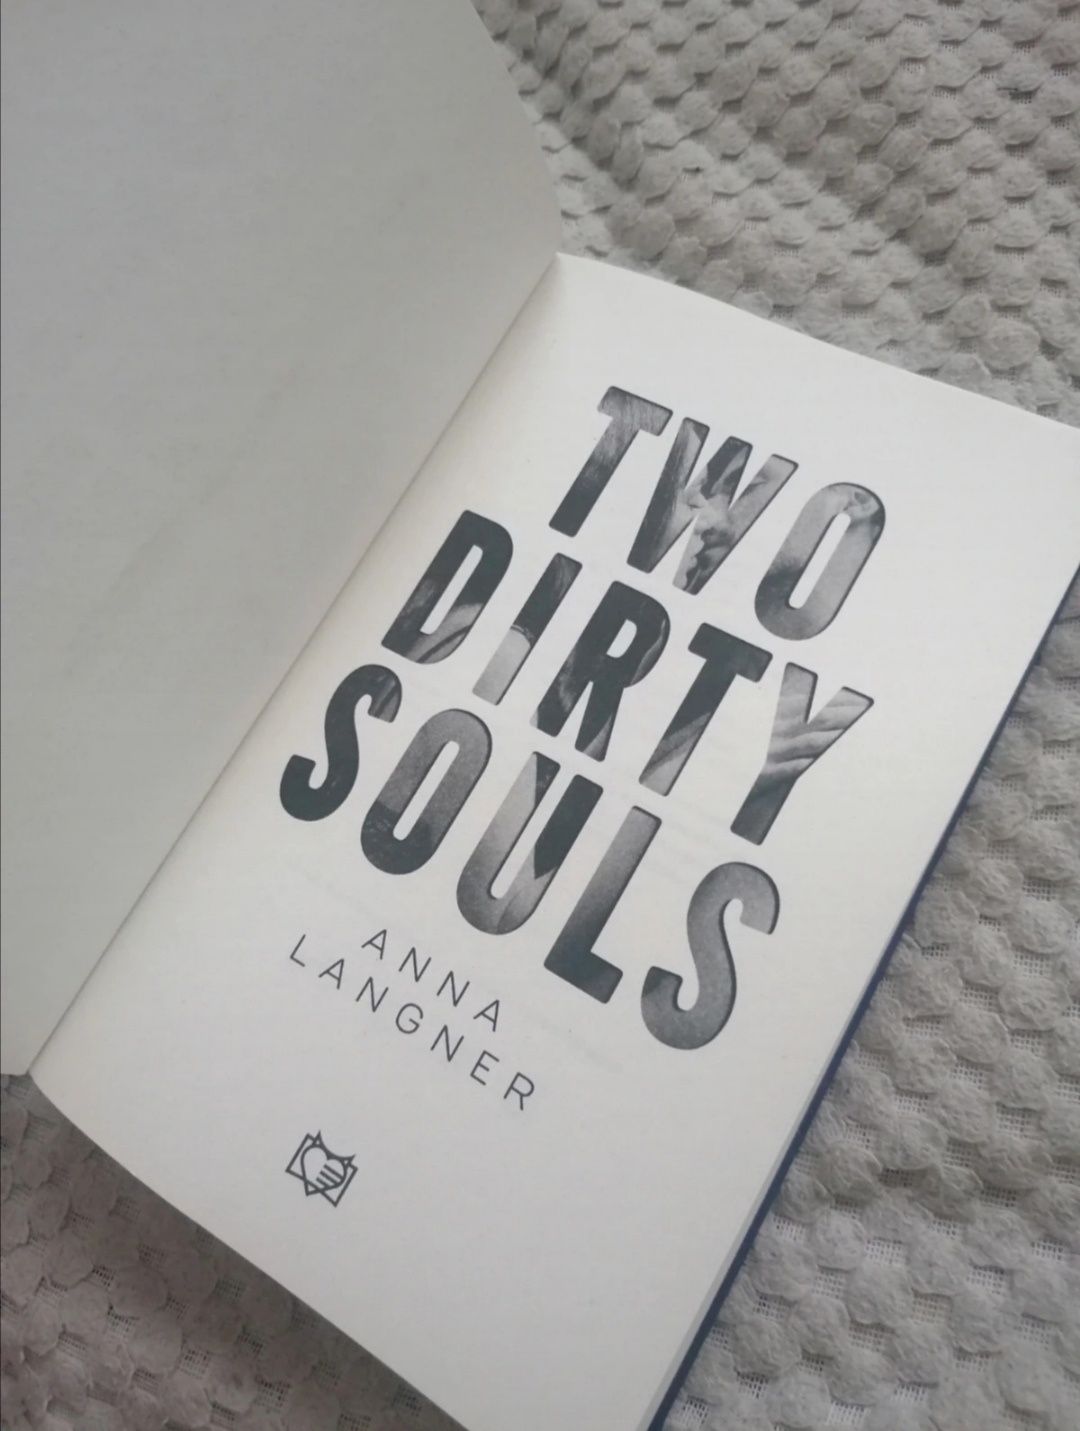 Two dirty souls - Anna Langner